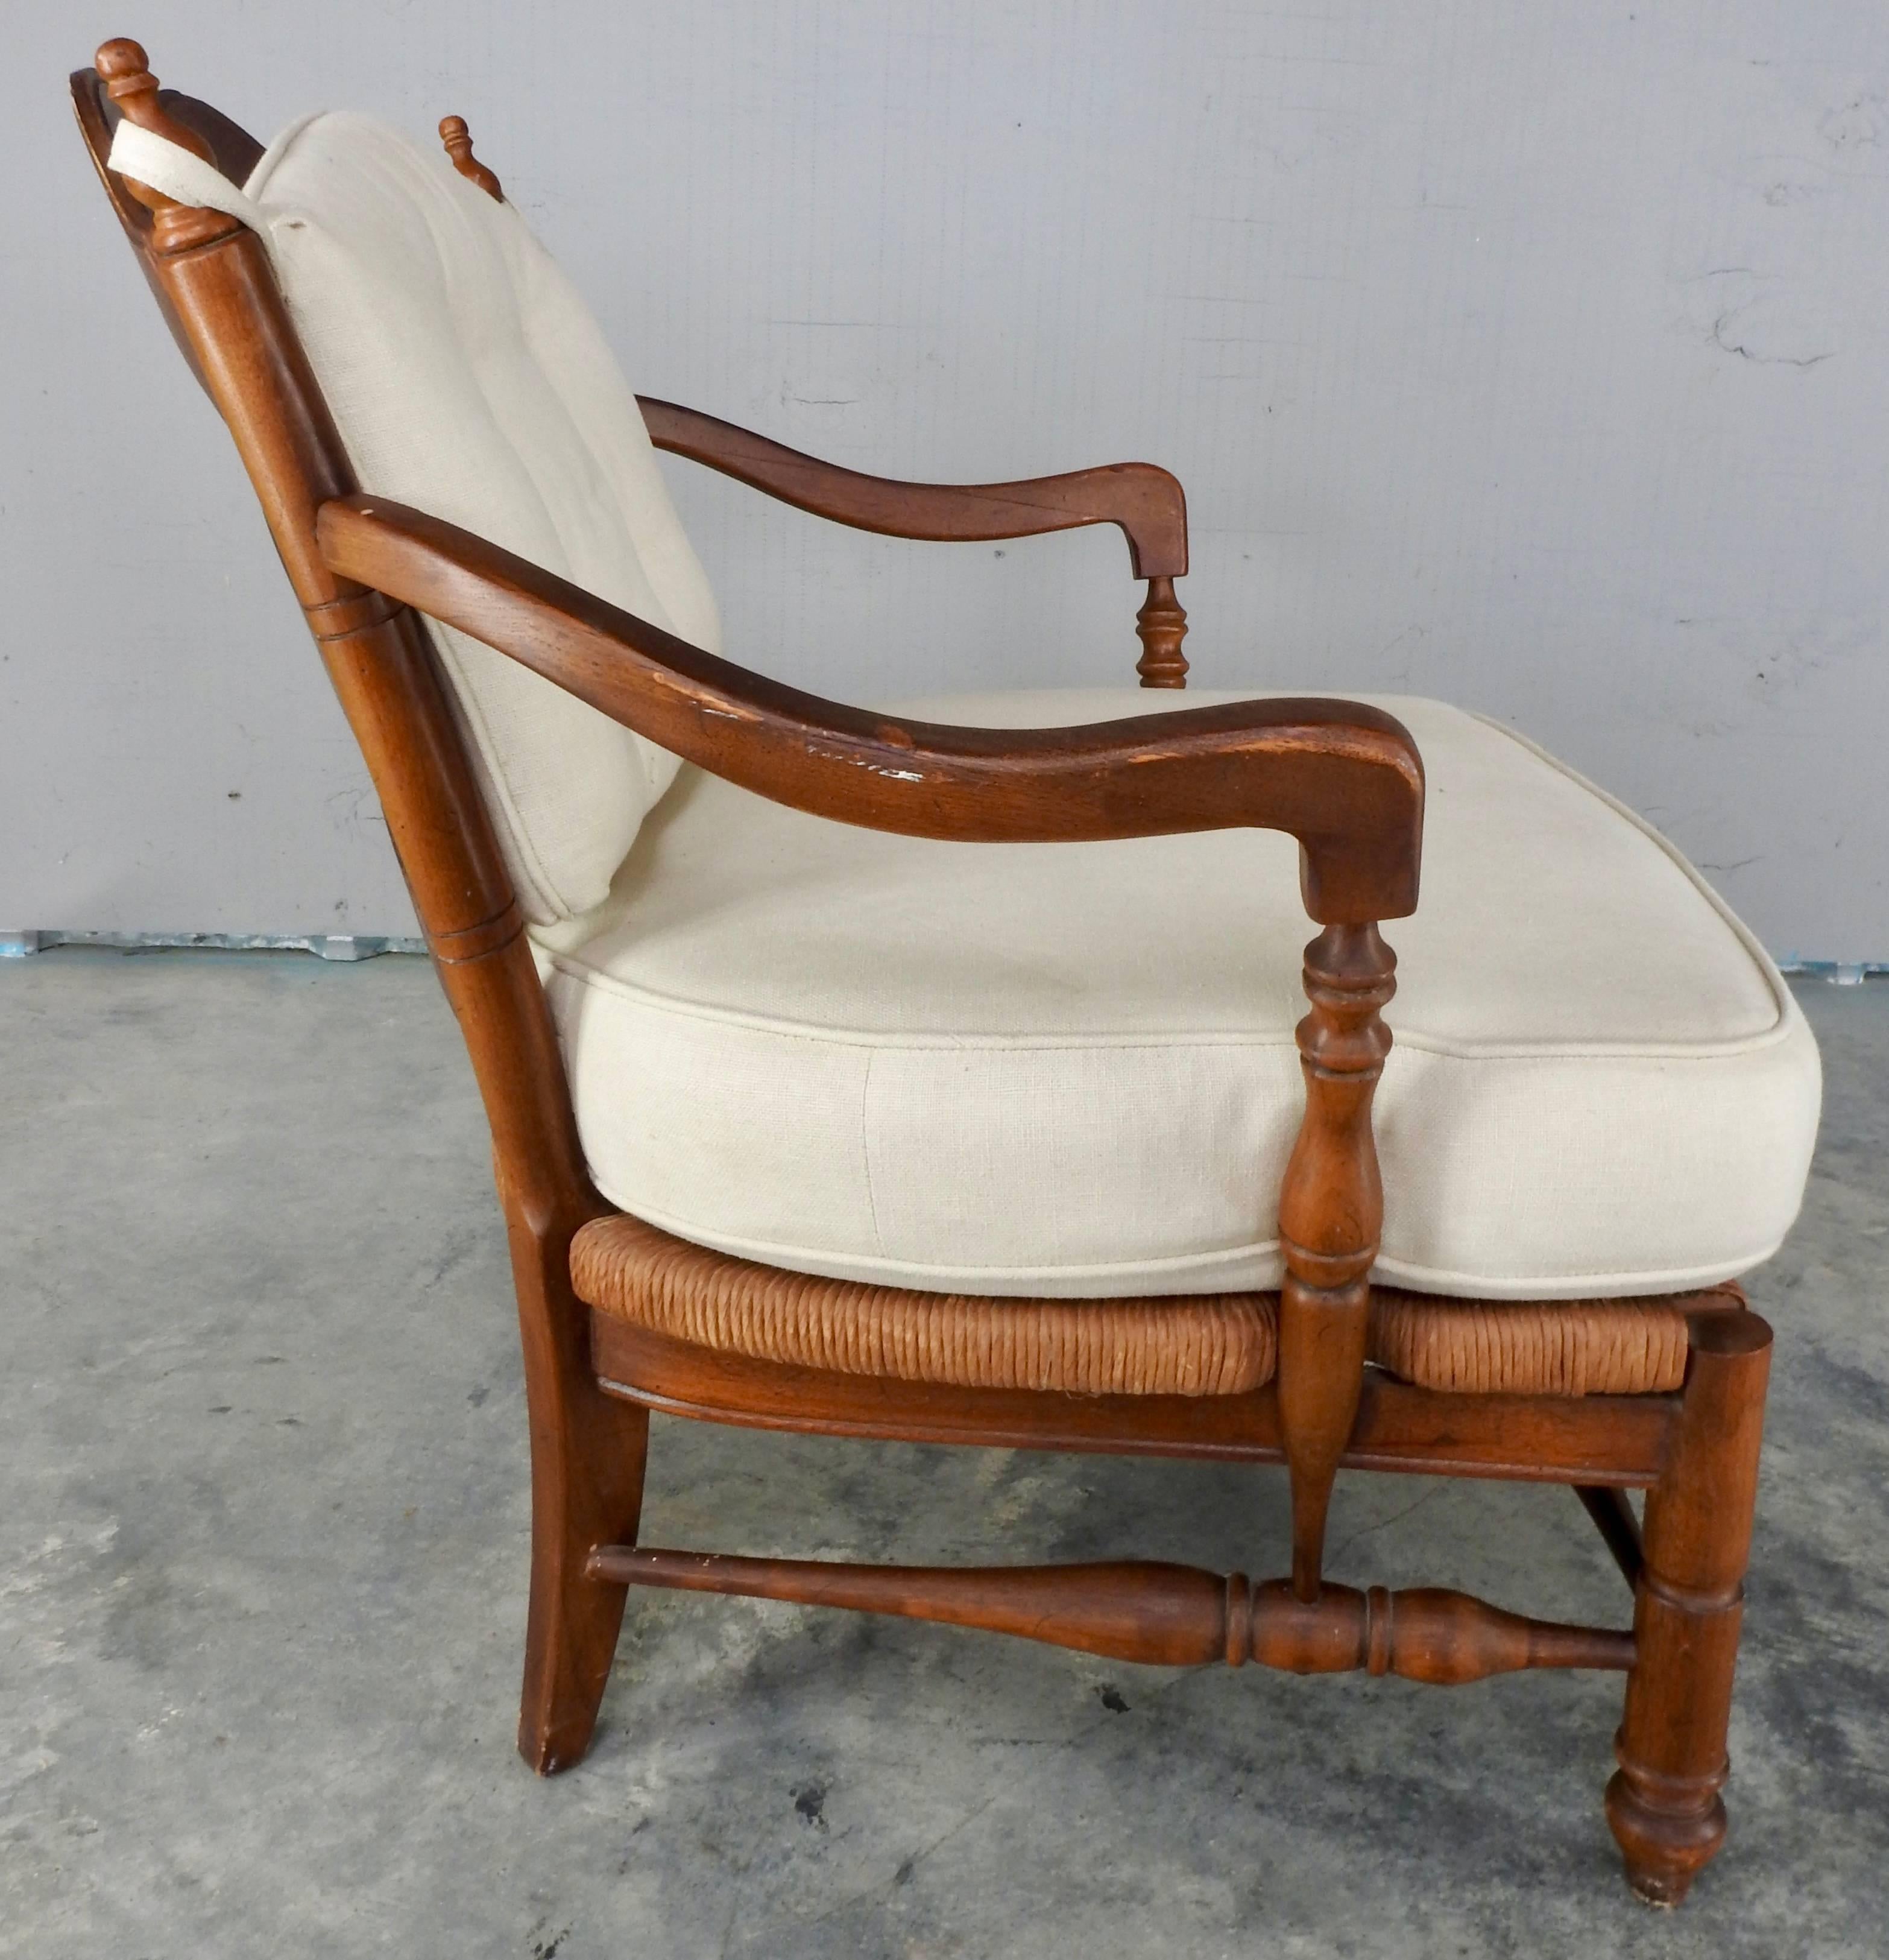 Hand-Crafted Danish Lounge Chair, Mid-20th Century